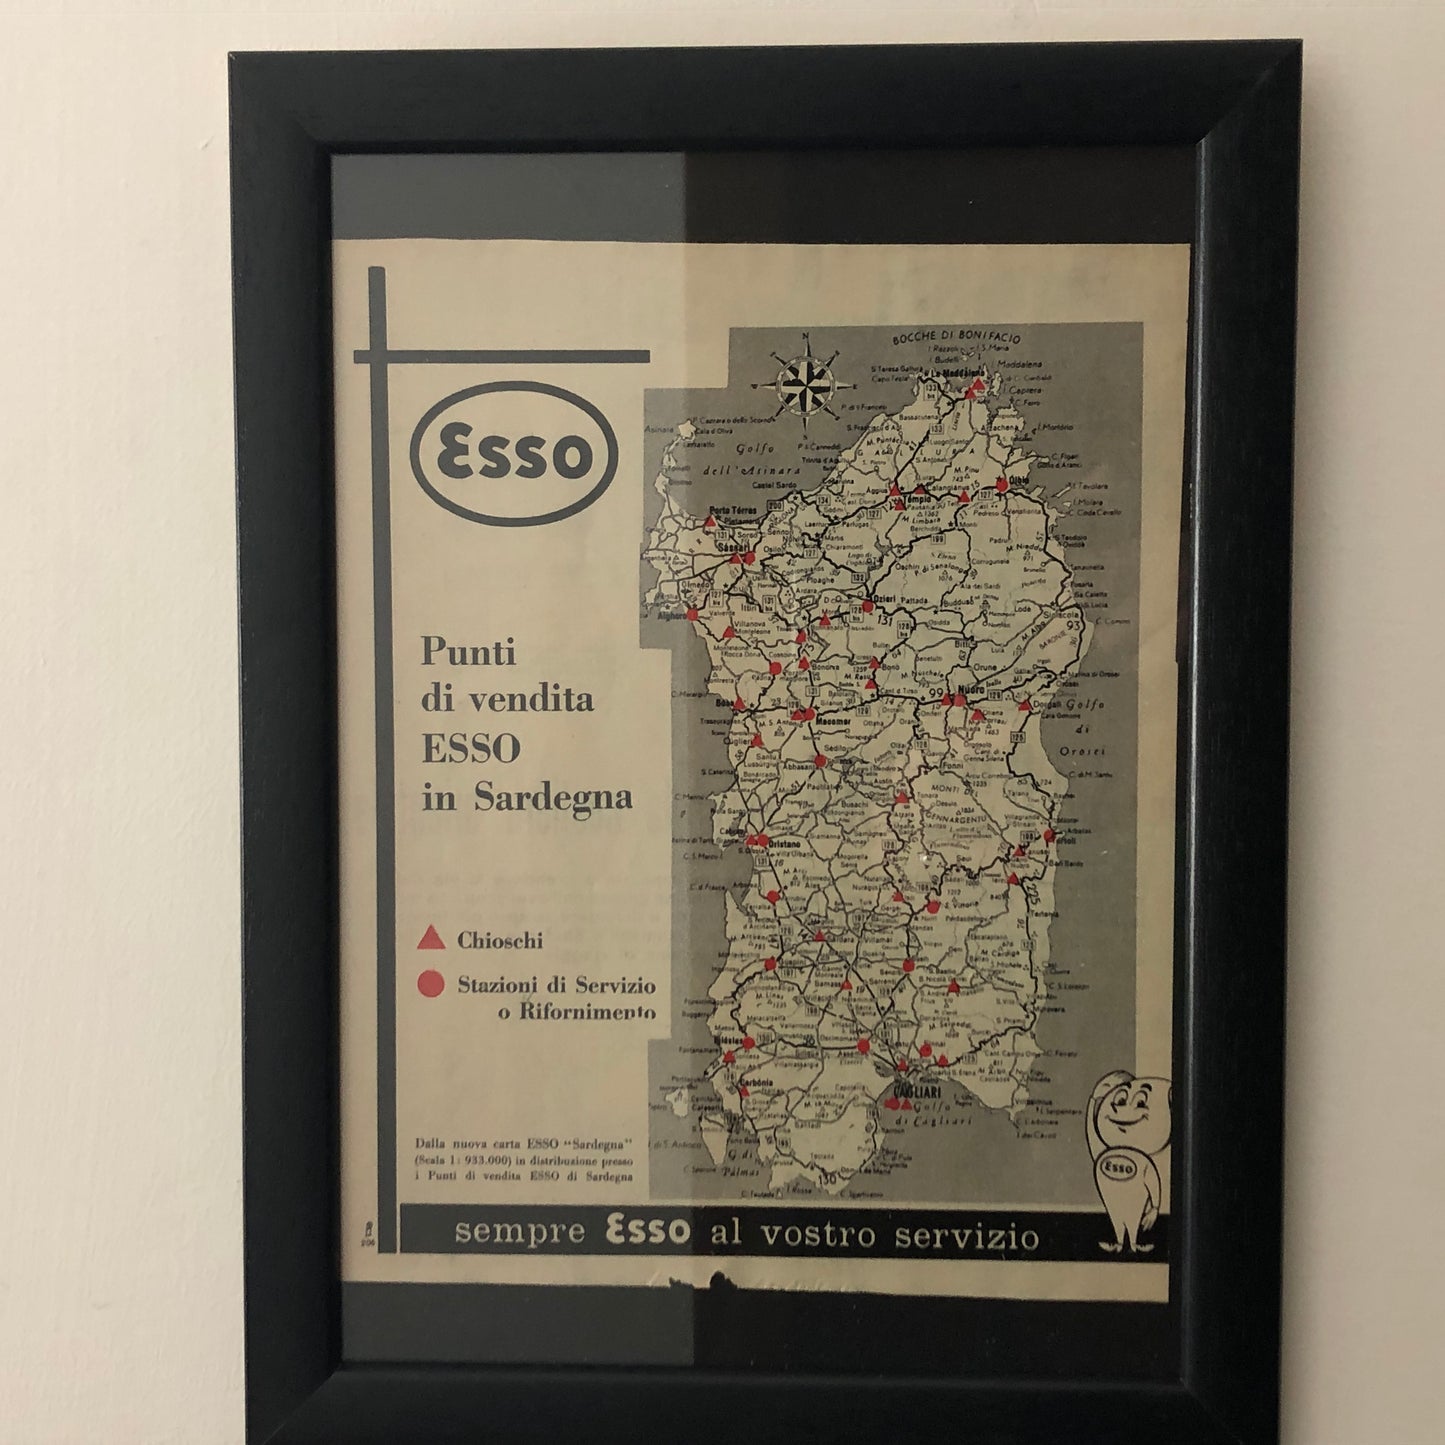 Esso, 1960 Advertising Esso Points of Sale - Service Stations in Sardinia with Italian Caption